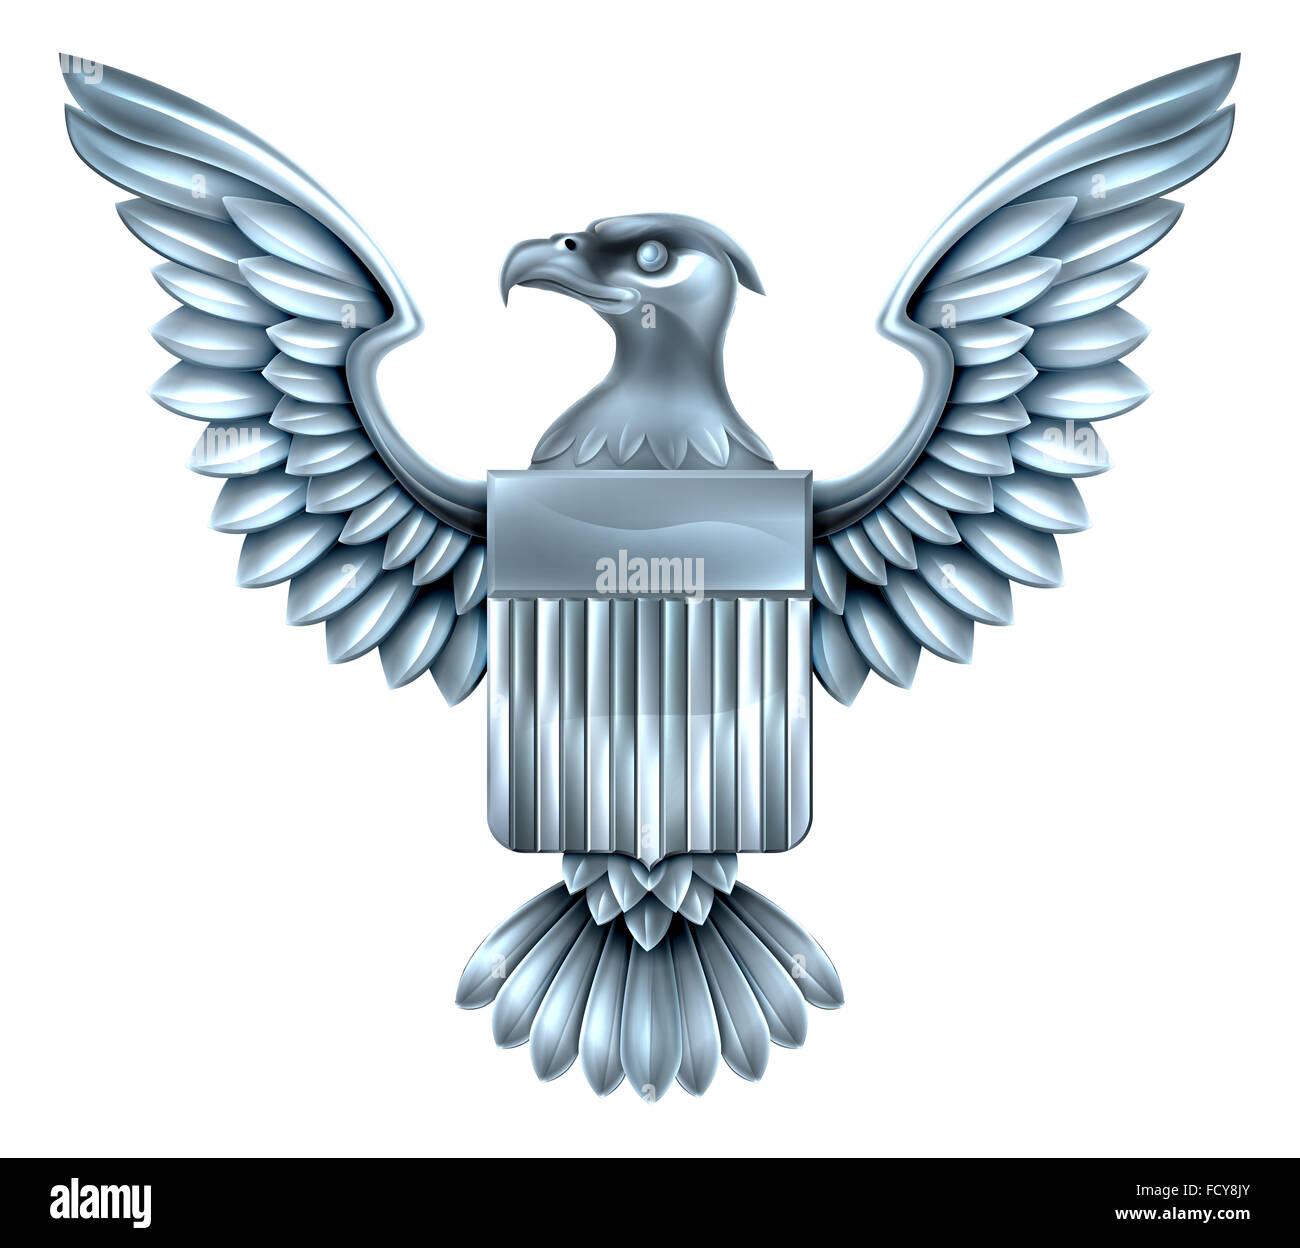 Silver steel metal American Eagle Design with bald eagle of the United States with American flag shield Stock Photo